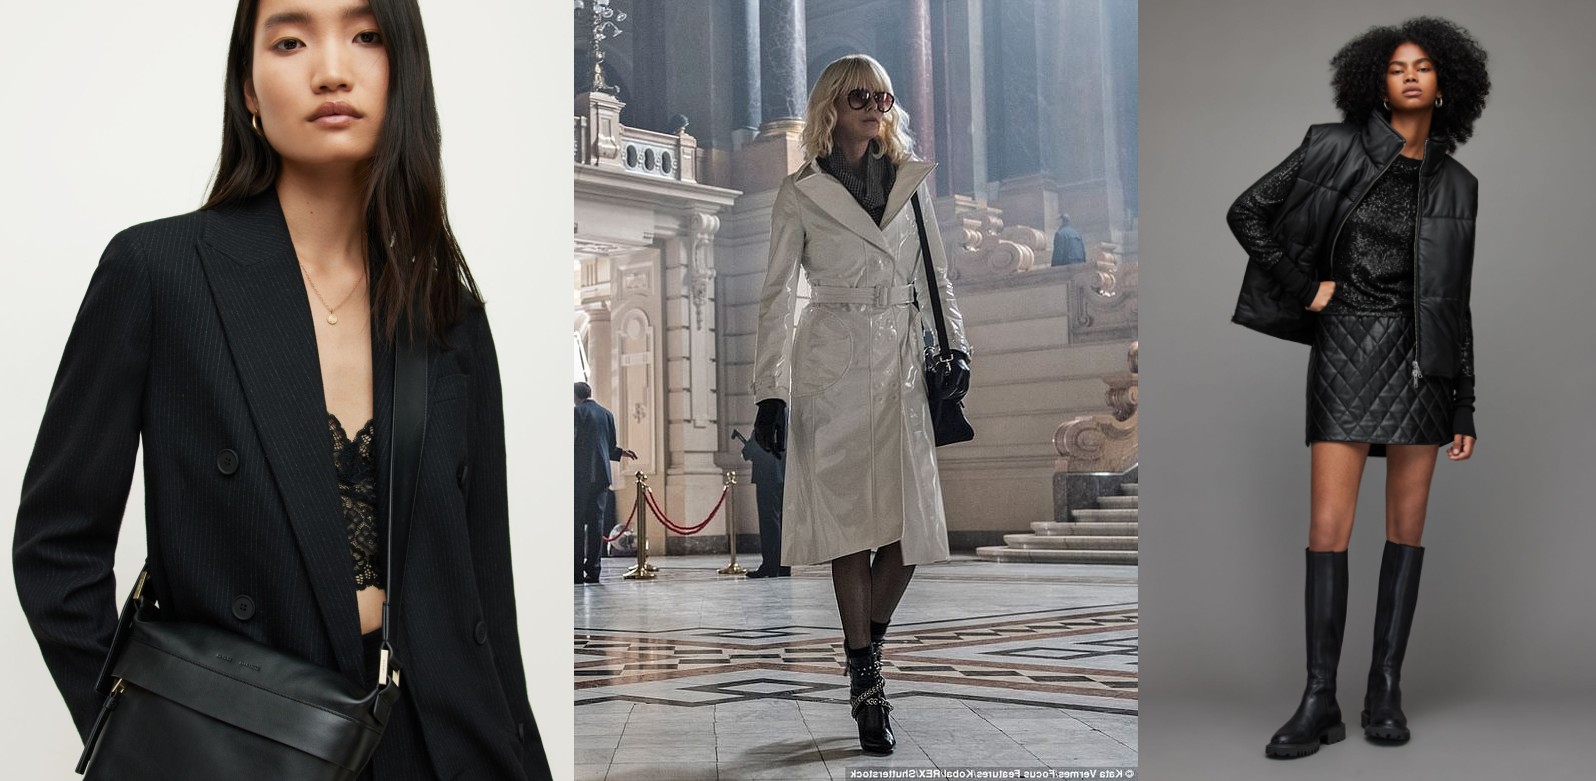 Baddie Aesthetic Outfits (Classic & Edgy - The Atomic Blonde)